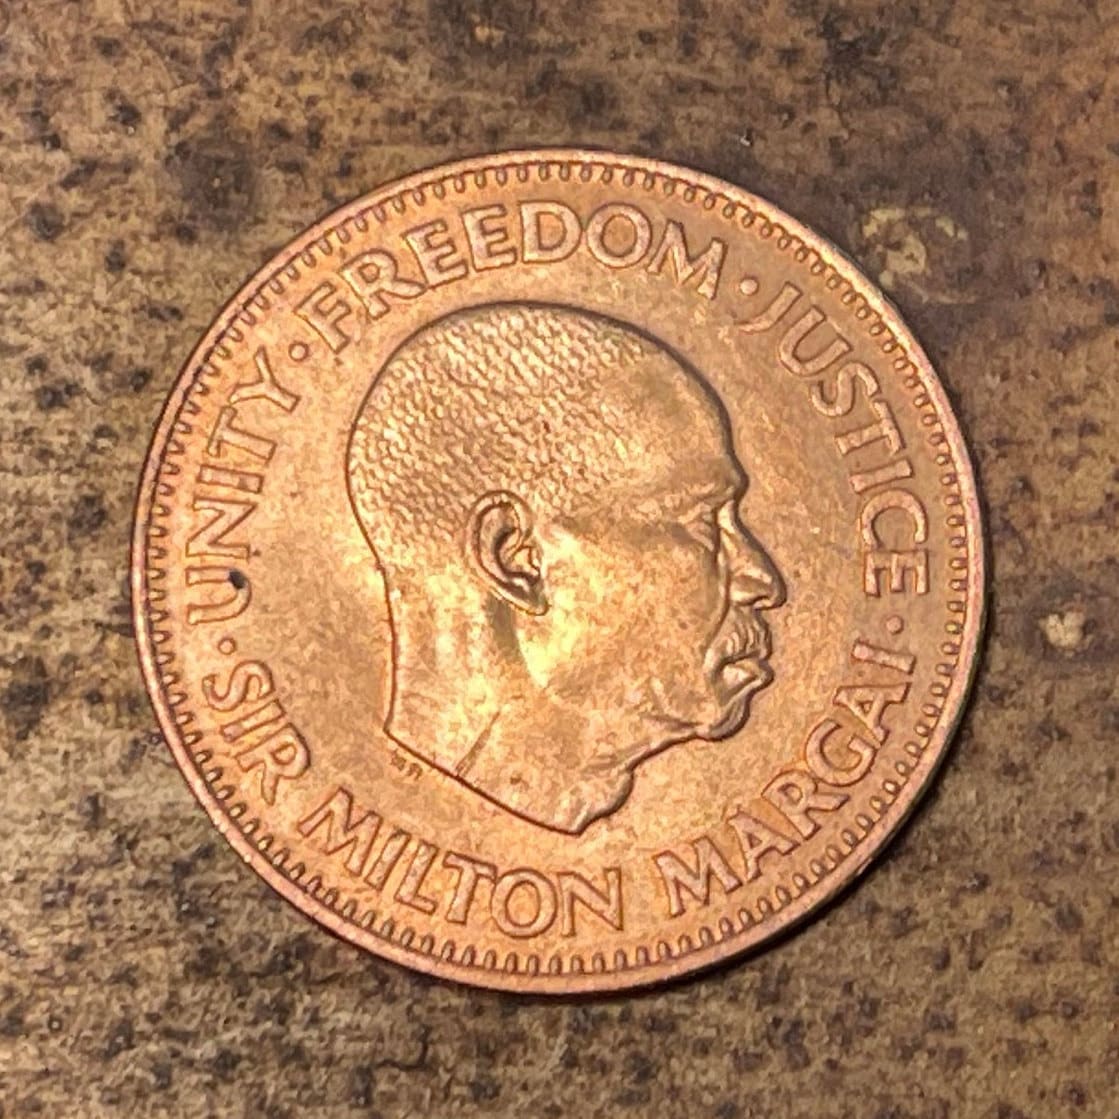 Sir Milton Margai & Bonga Shad 1/2 Cent Sierra Leone Authentic Coin Money for Jewelry and Craft Making (1964)